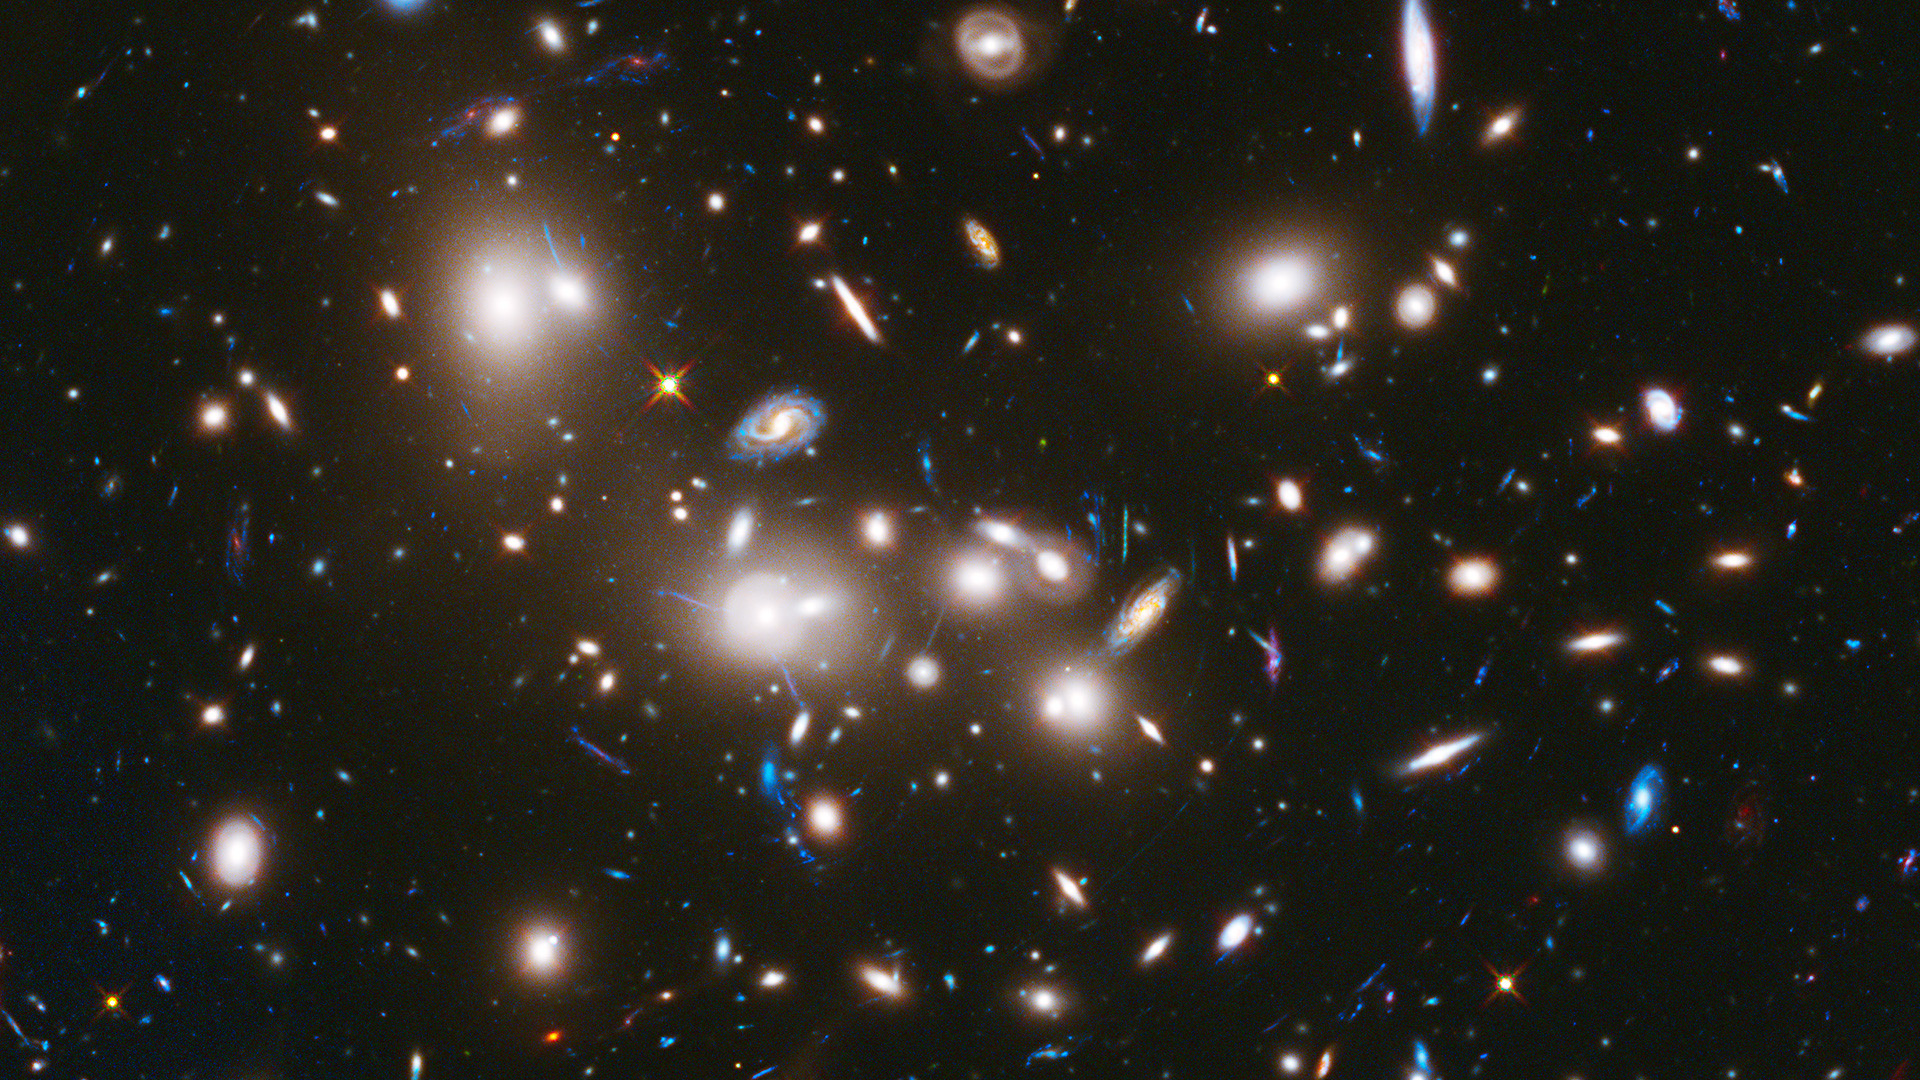 1920x1080 hubble images super high resolution - Google Search